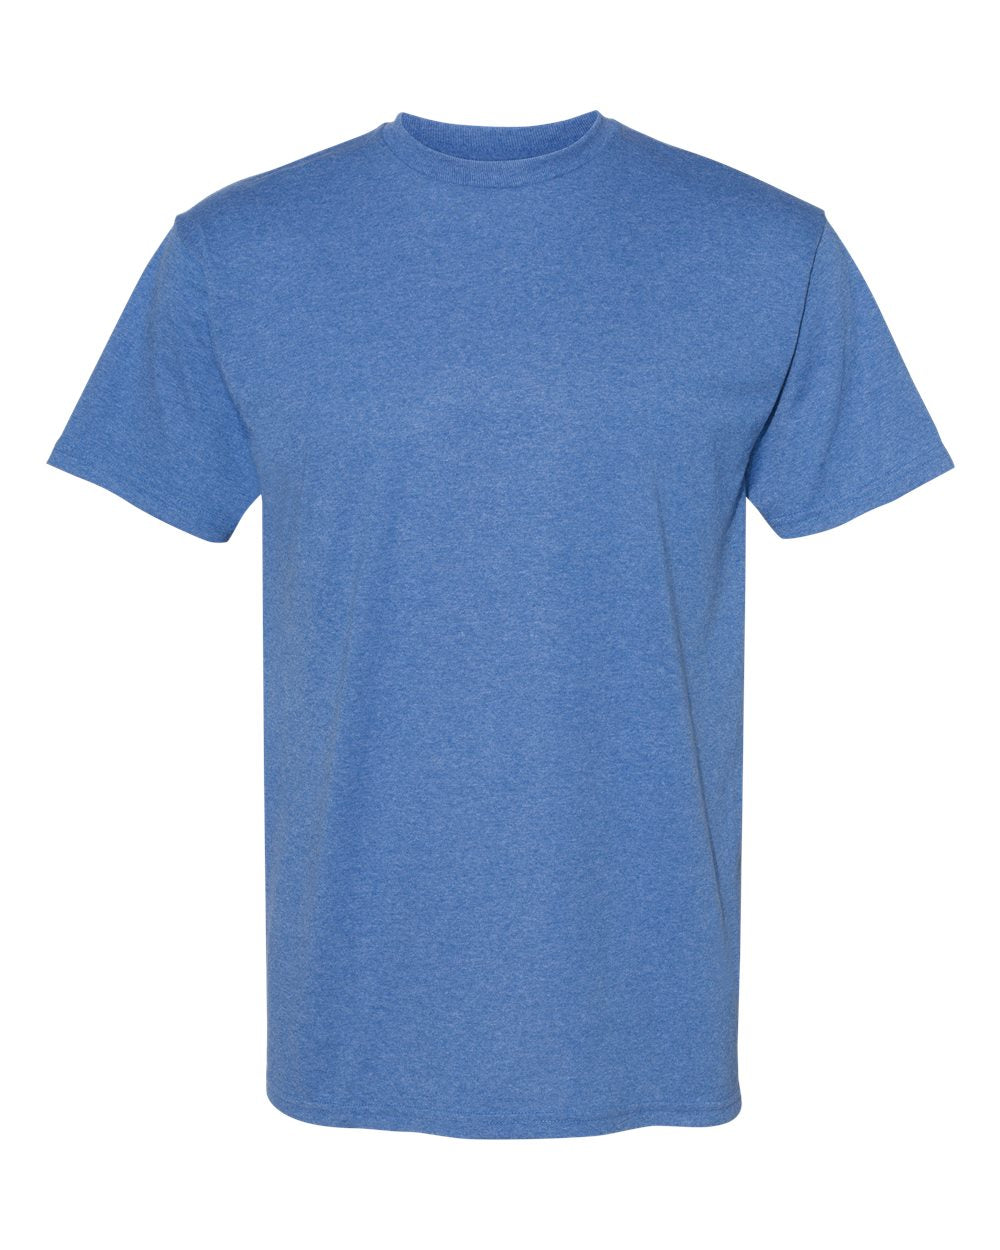 American Apparel Midweight Cotton Unisex Tee 1701 #color_Heather Royal